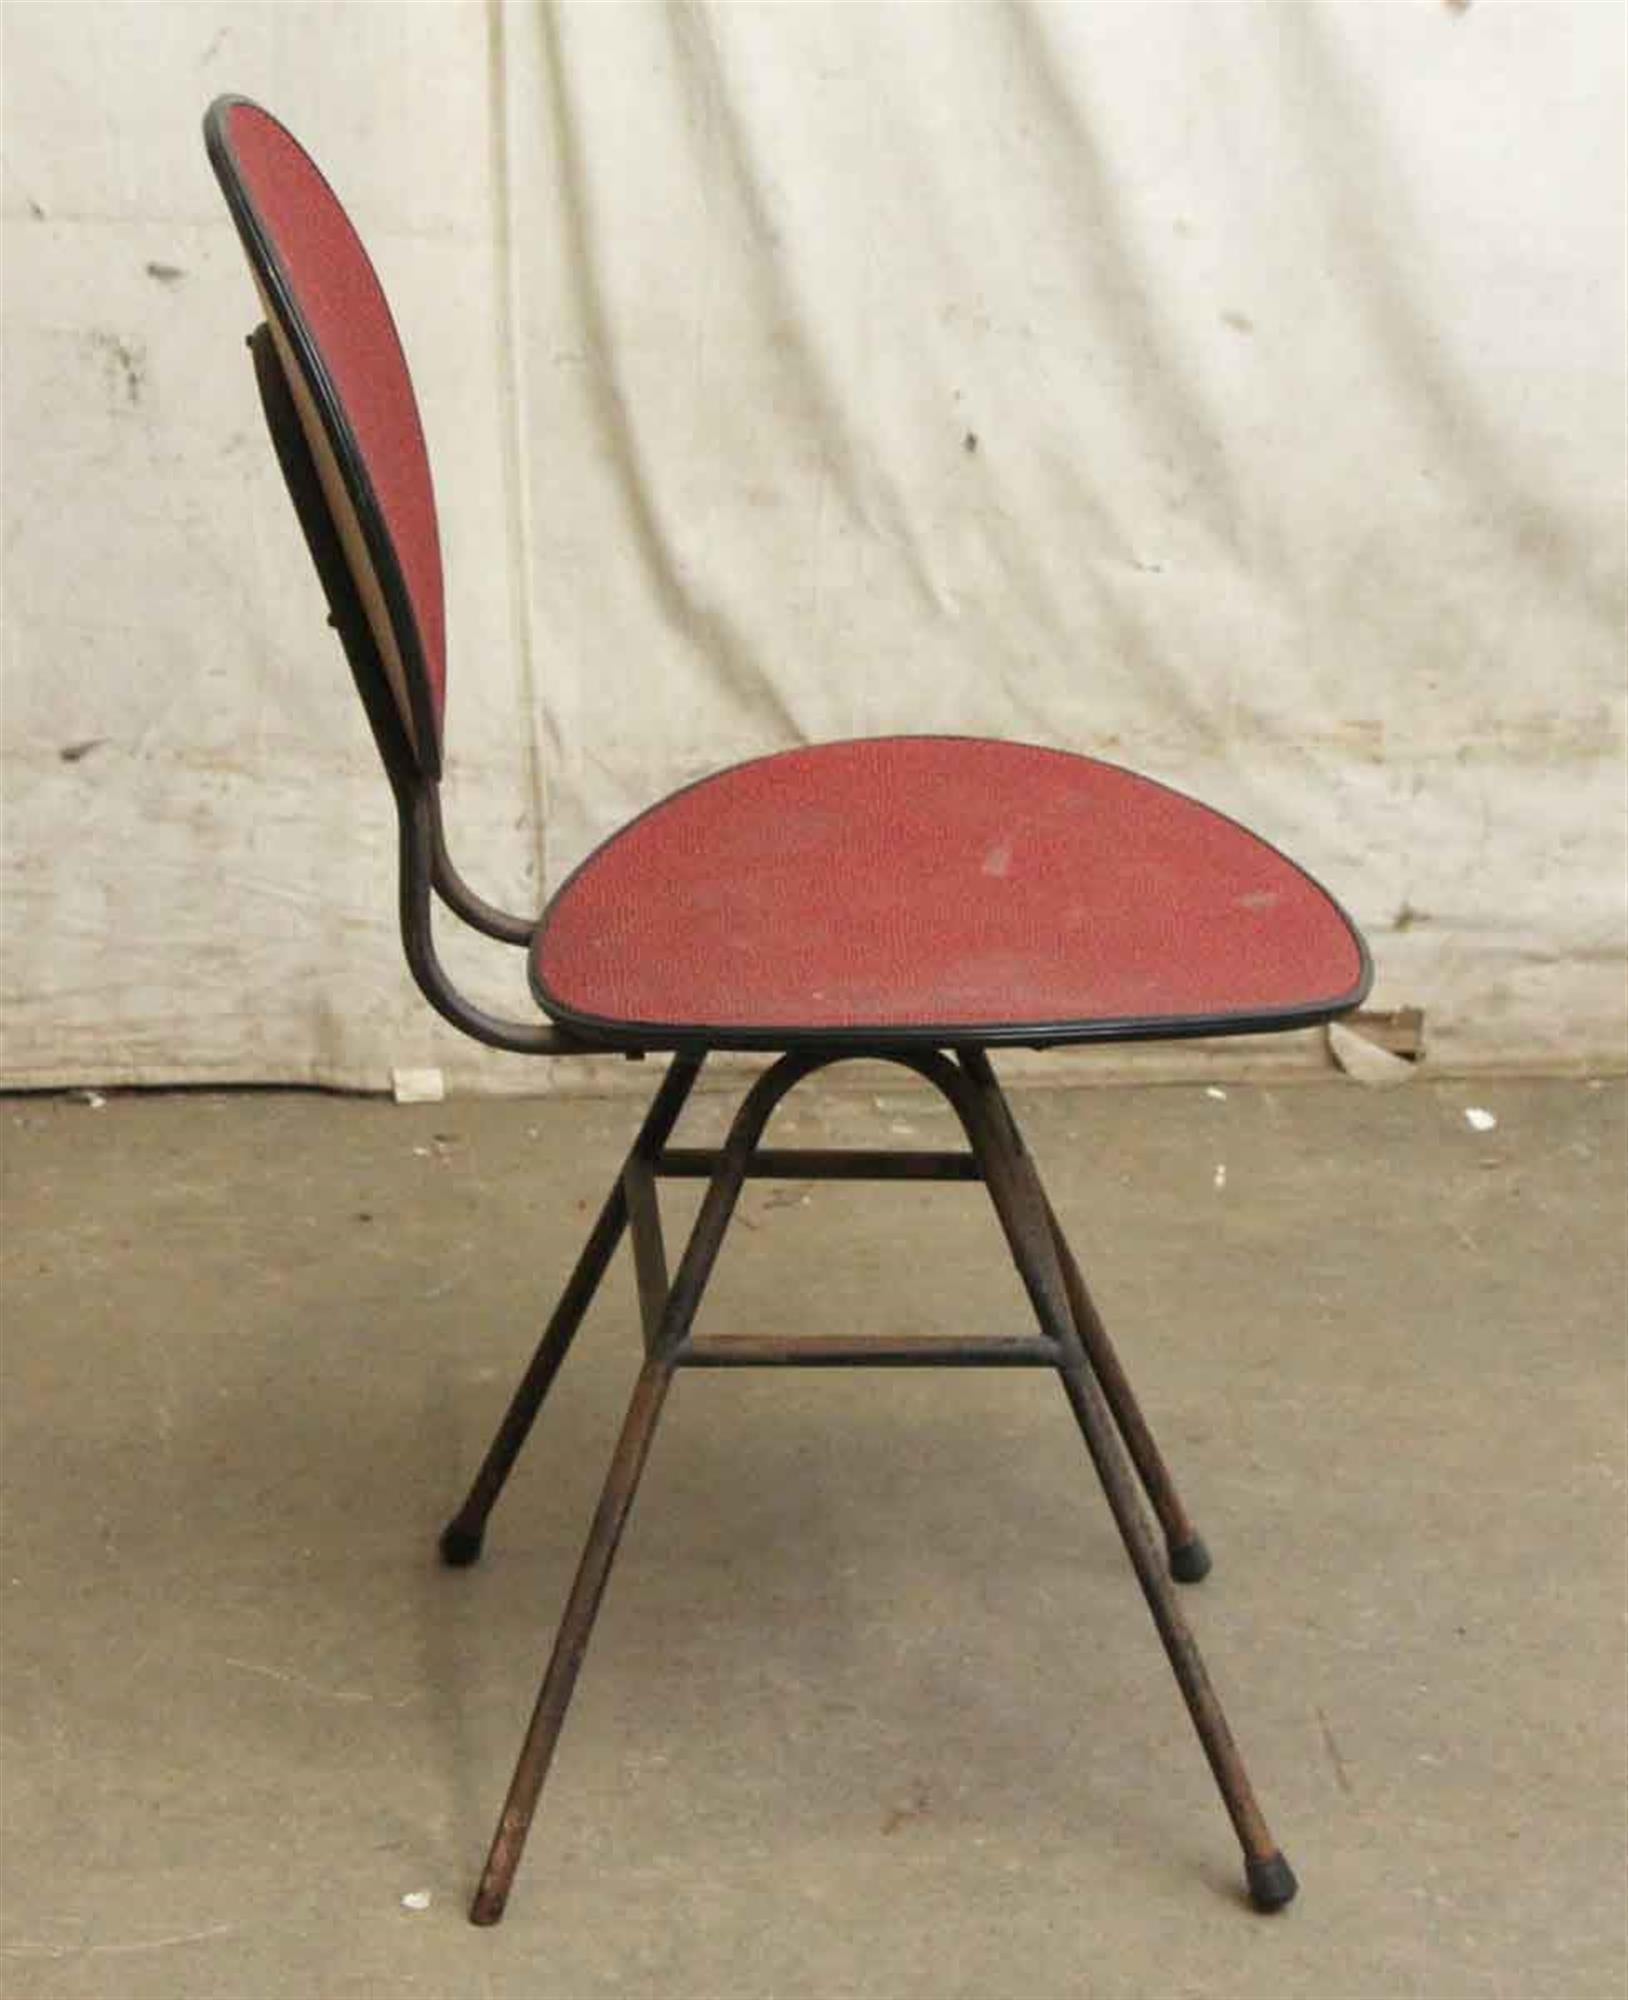 Metal 1960s French Mid-Century Modern Black and Red Chair